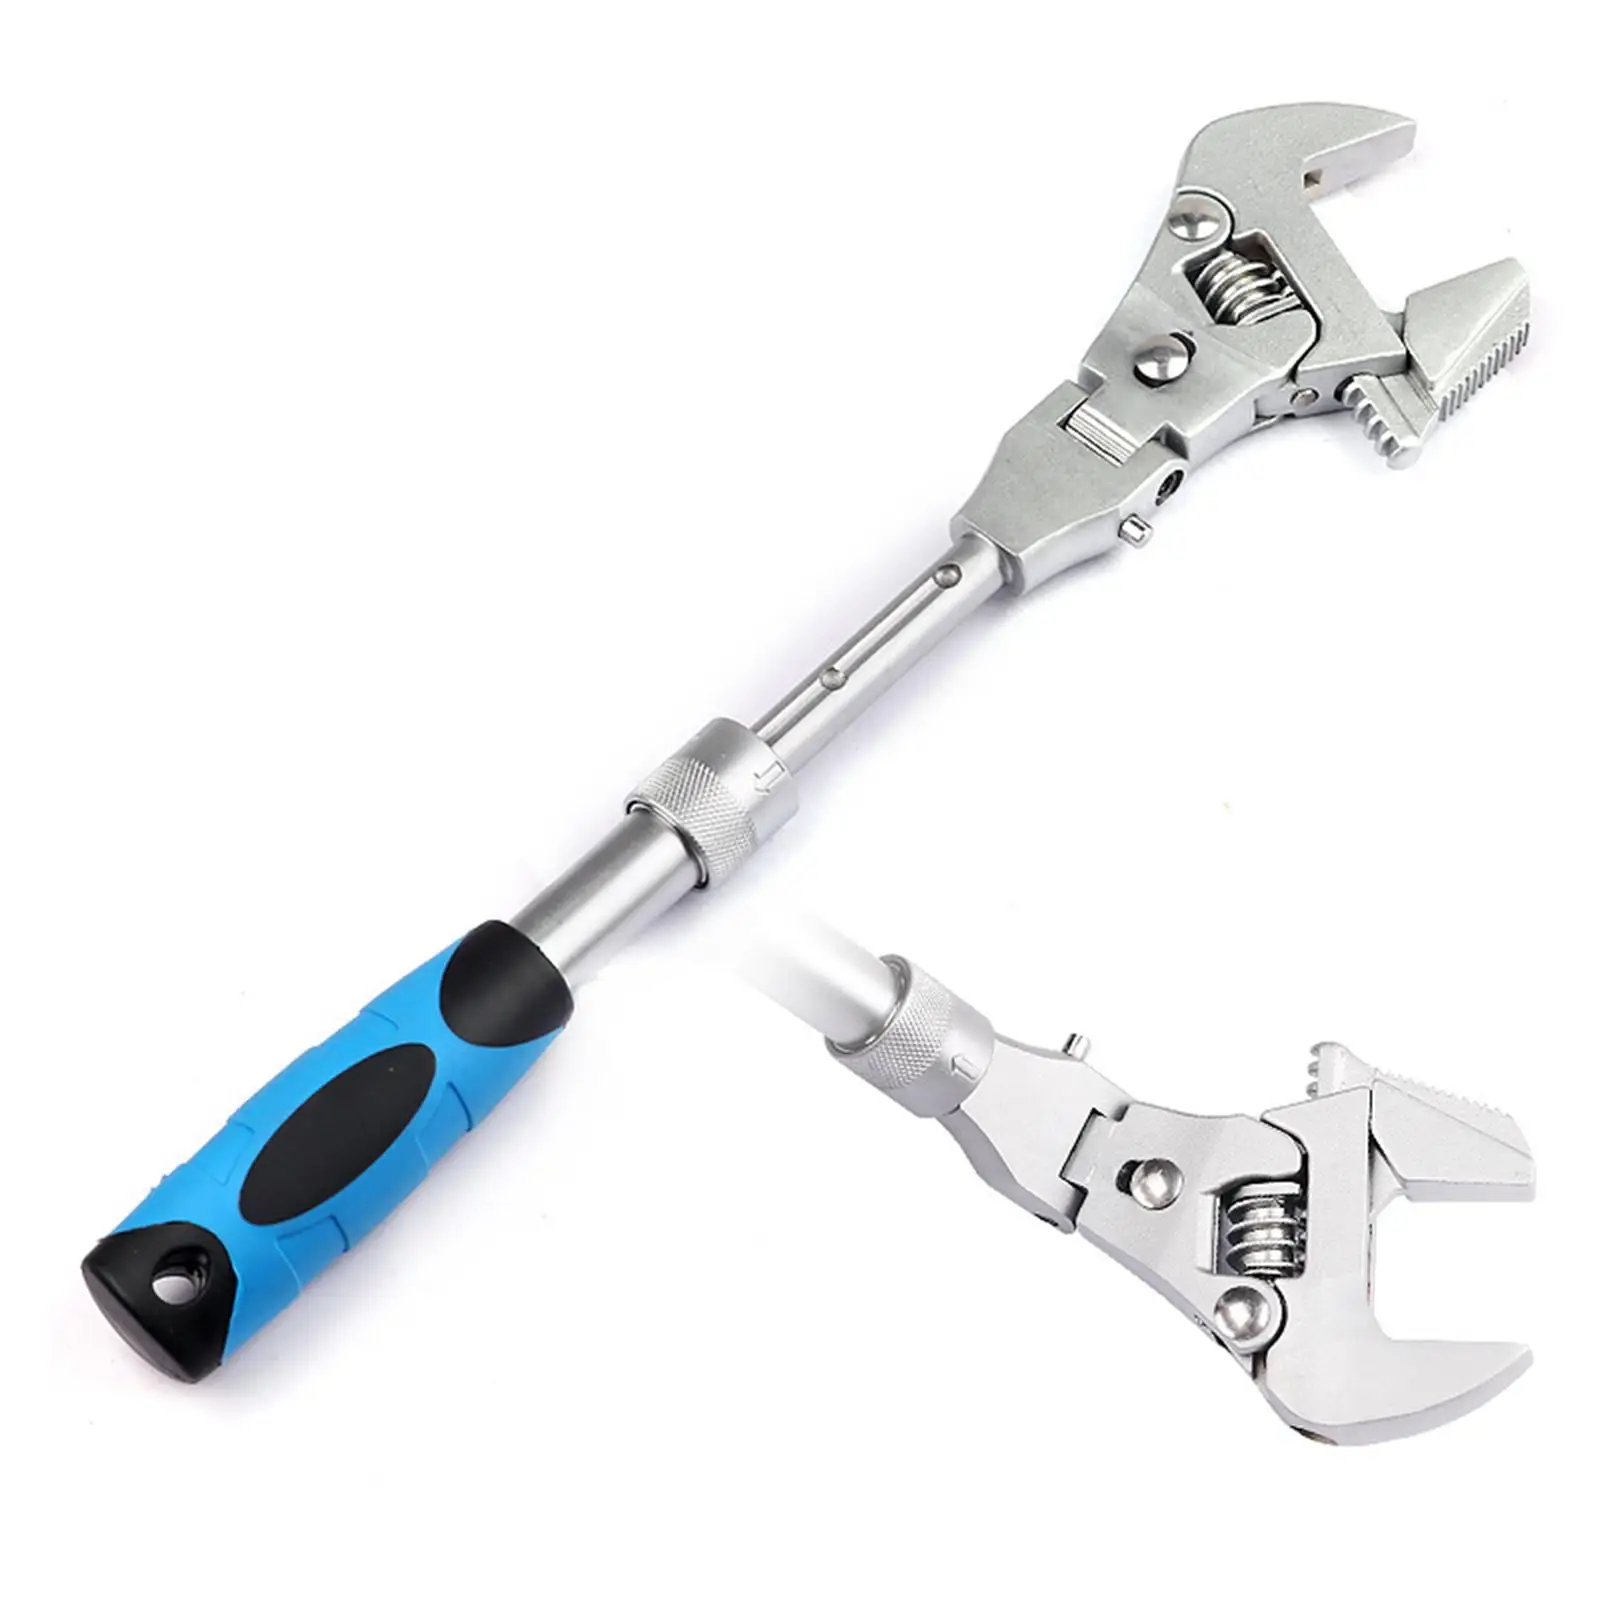  Adjustable Wrench 5 in 1 Flex Ratcheting Wrench 10-Inch Universal Rotating Head Universal Wrench for Air Conditioning